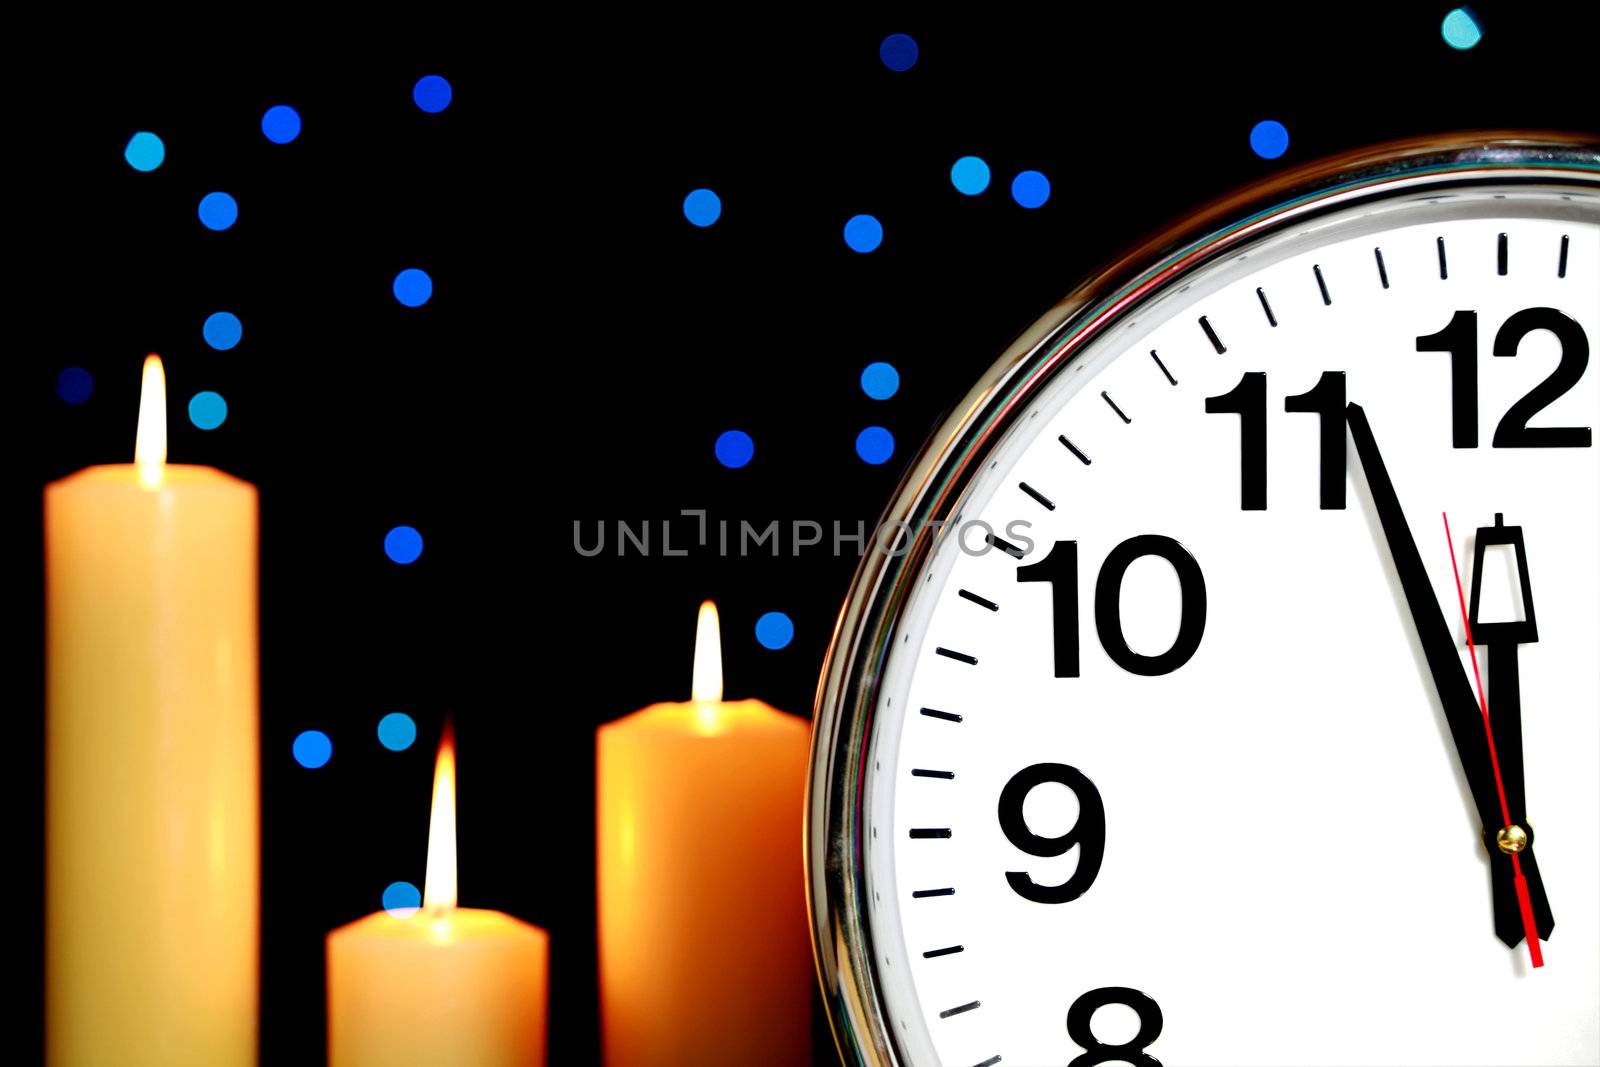 Clock set at three minutes to midnight with blue Christmas lights in background and candles burning